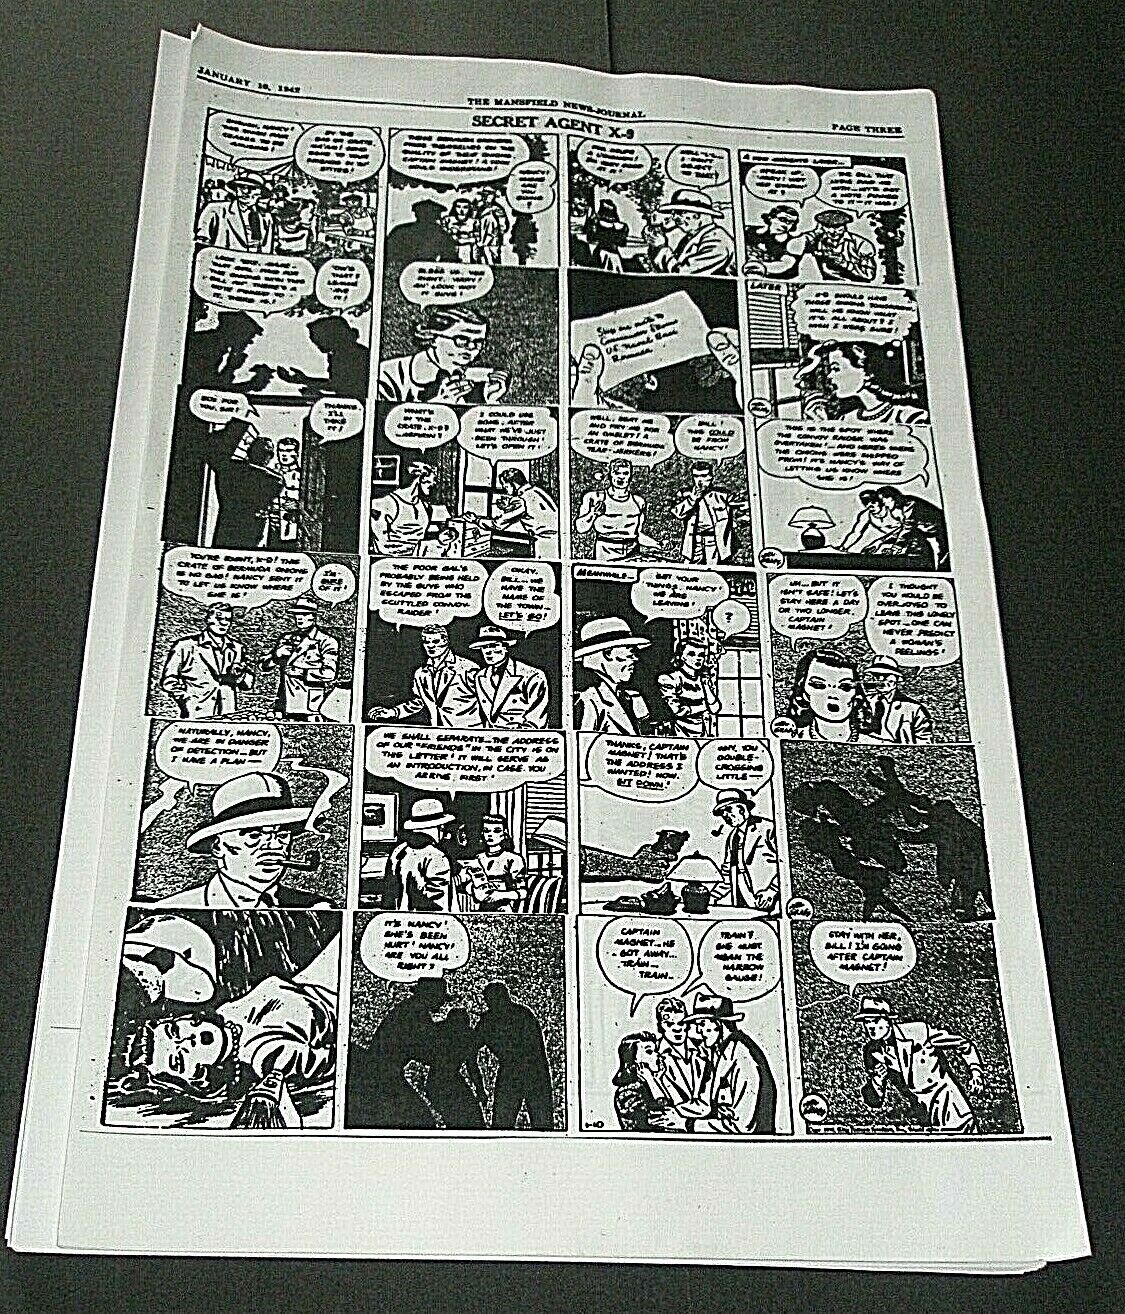 Secret Agent X-9 Comic Strip 49 Pages Mansfield News-Journal 1942 Reproductions 